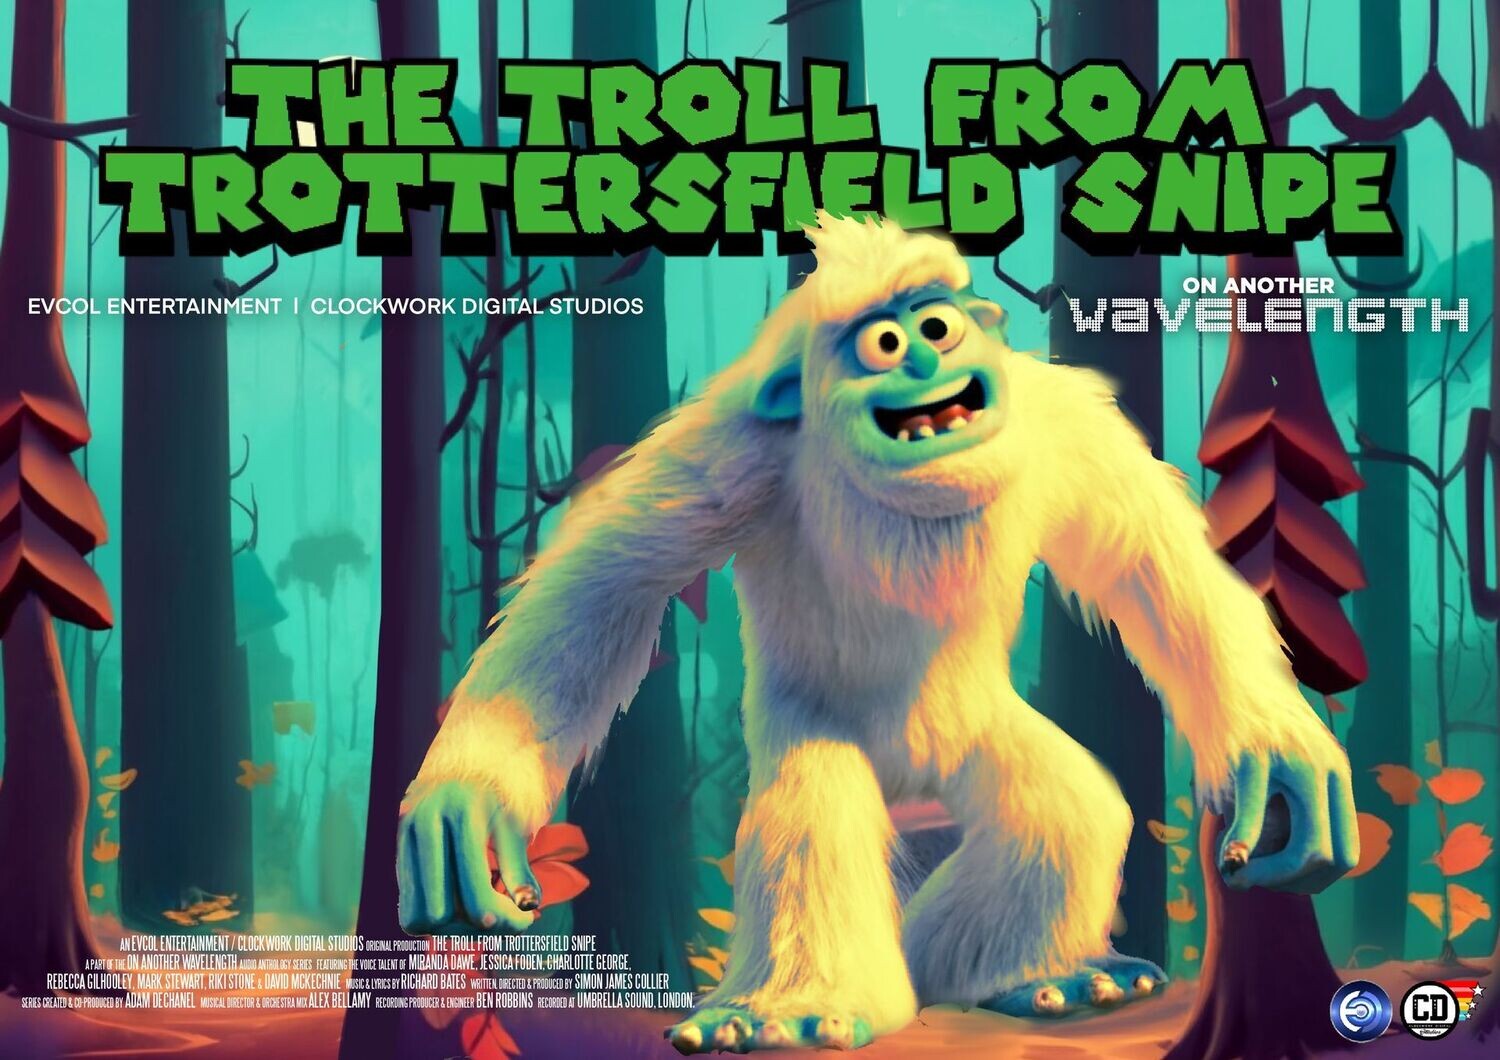 The Troll from Trottersfield Snipe by Simon James Collier & Richard Bates